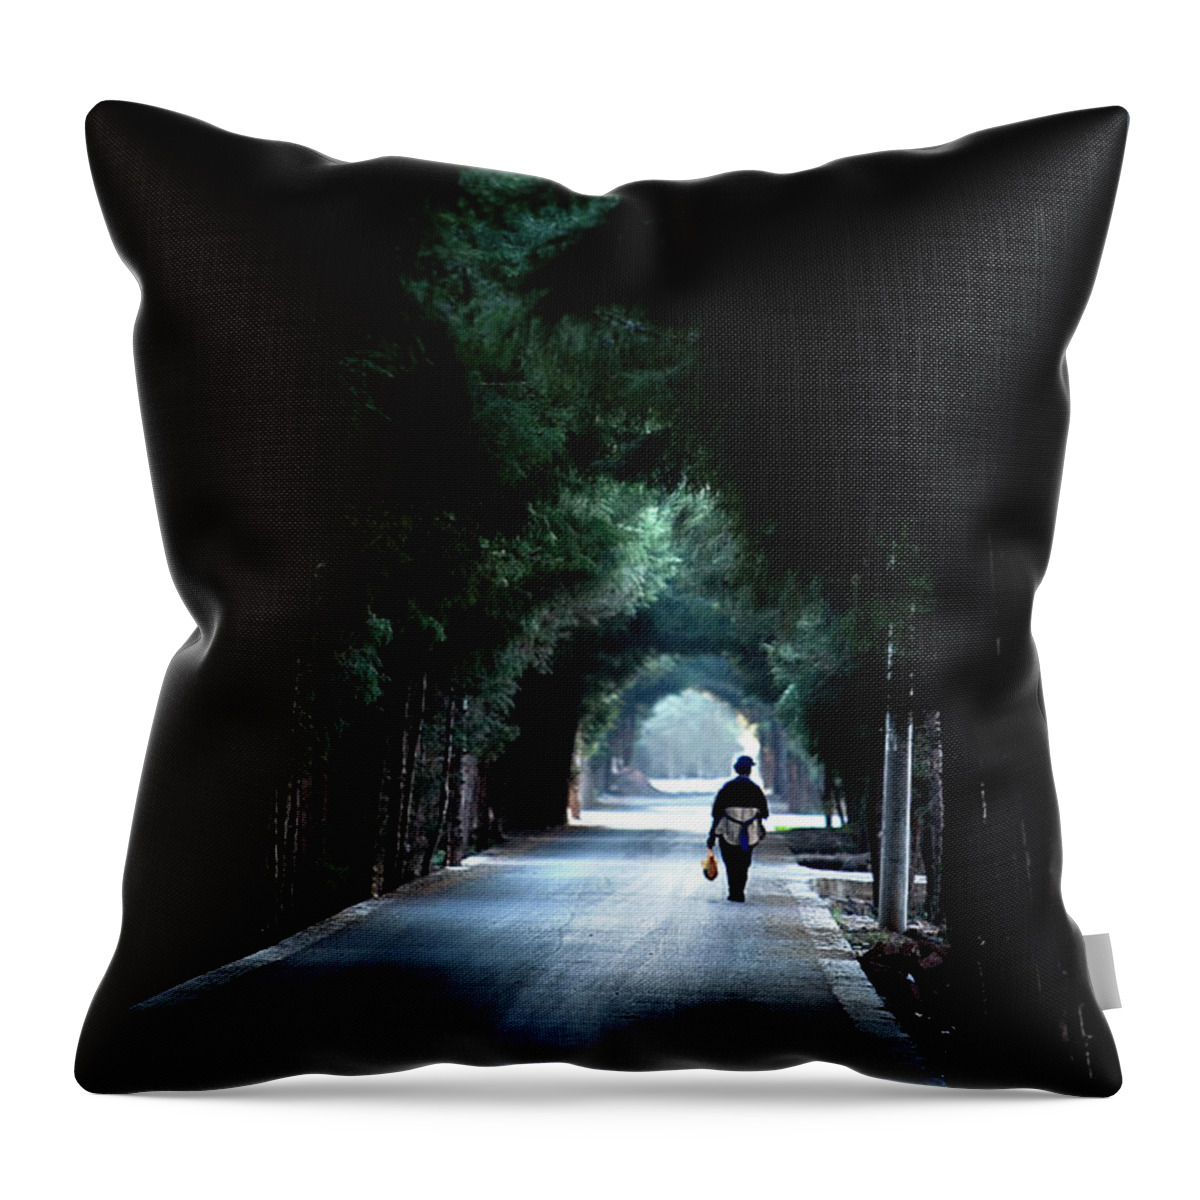 China Throw Pillow featuring the photograph Naxi Woman in the Tunnel of Trees by Mark Gomez